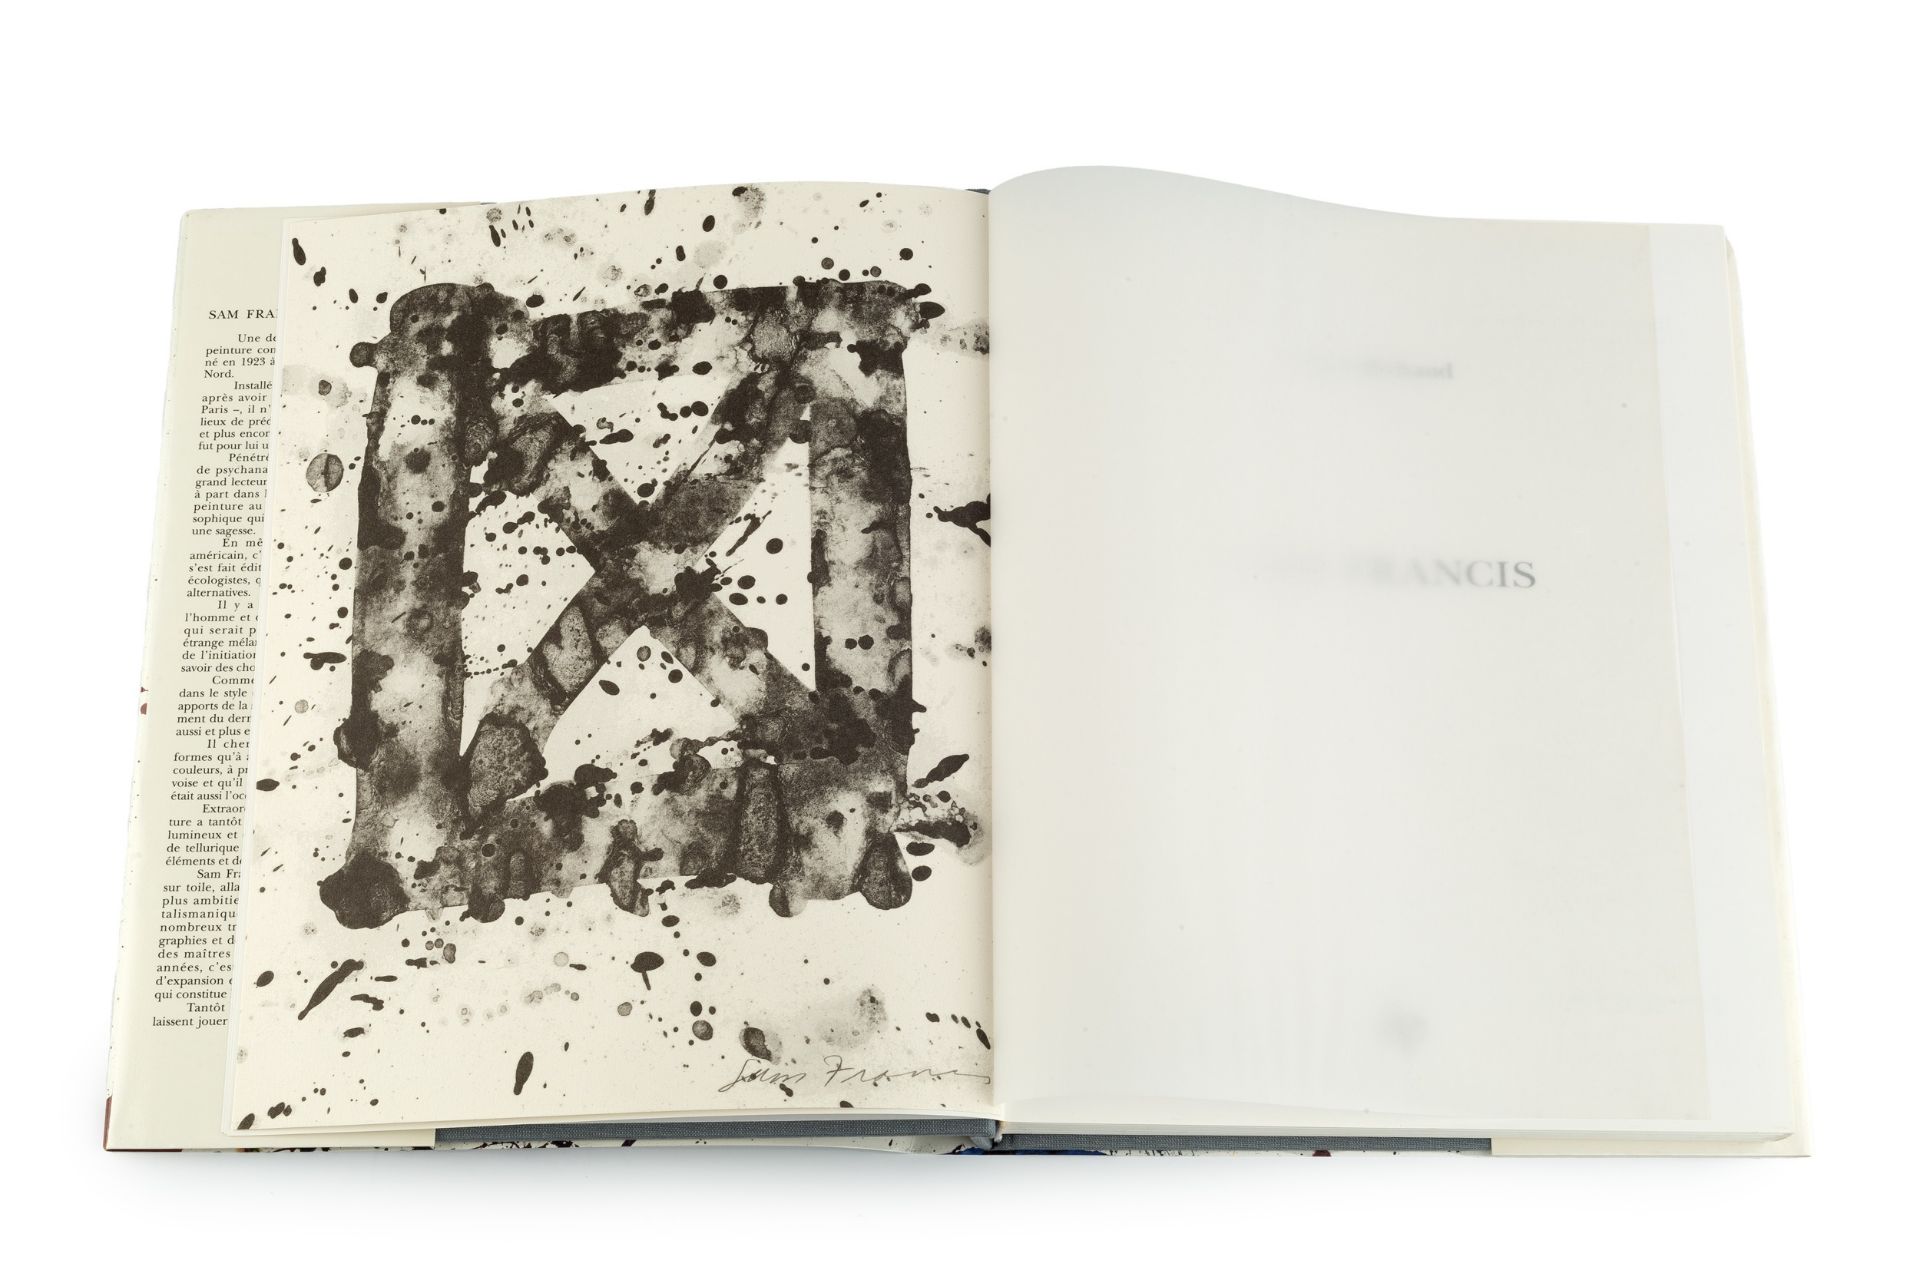 Sam Francis (1923-1994) Hardback book by Yves Michaud with a lithograph by the artist inset 30 x - Image 2 of 2